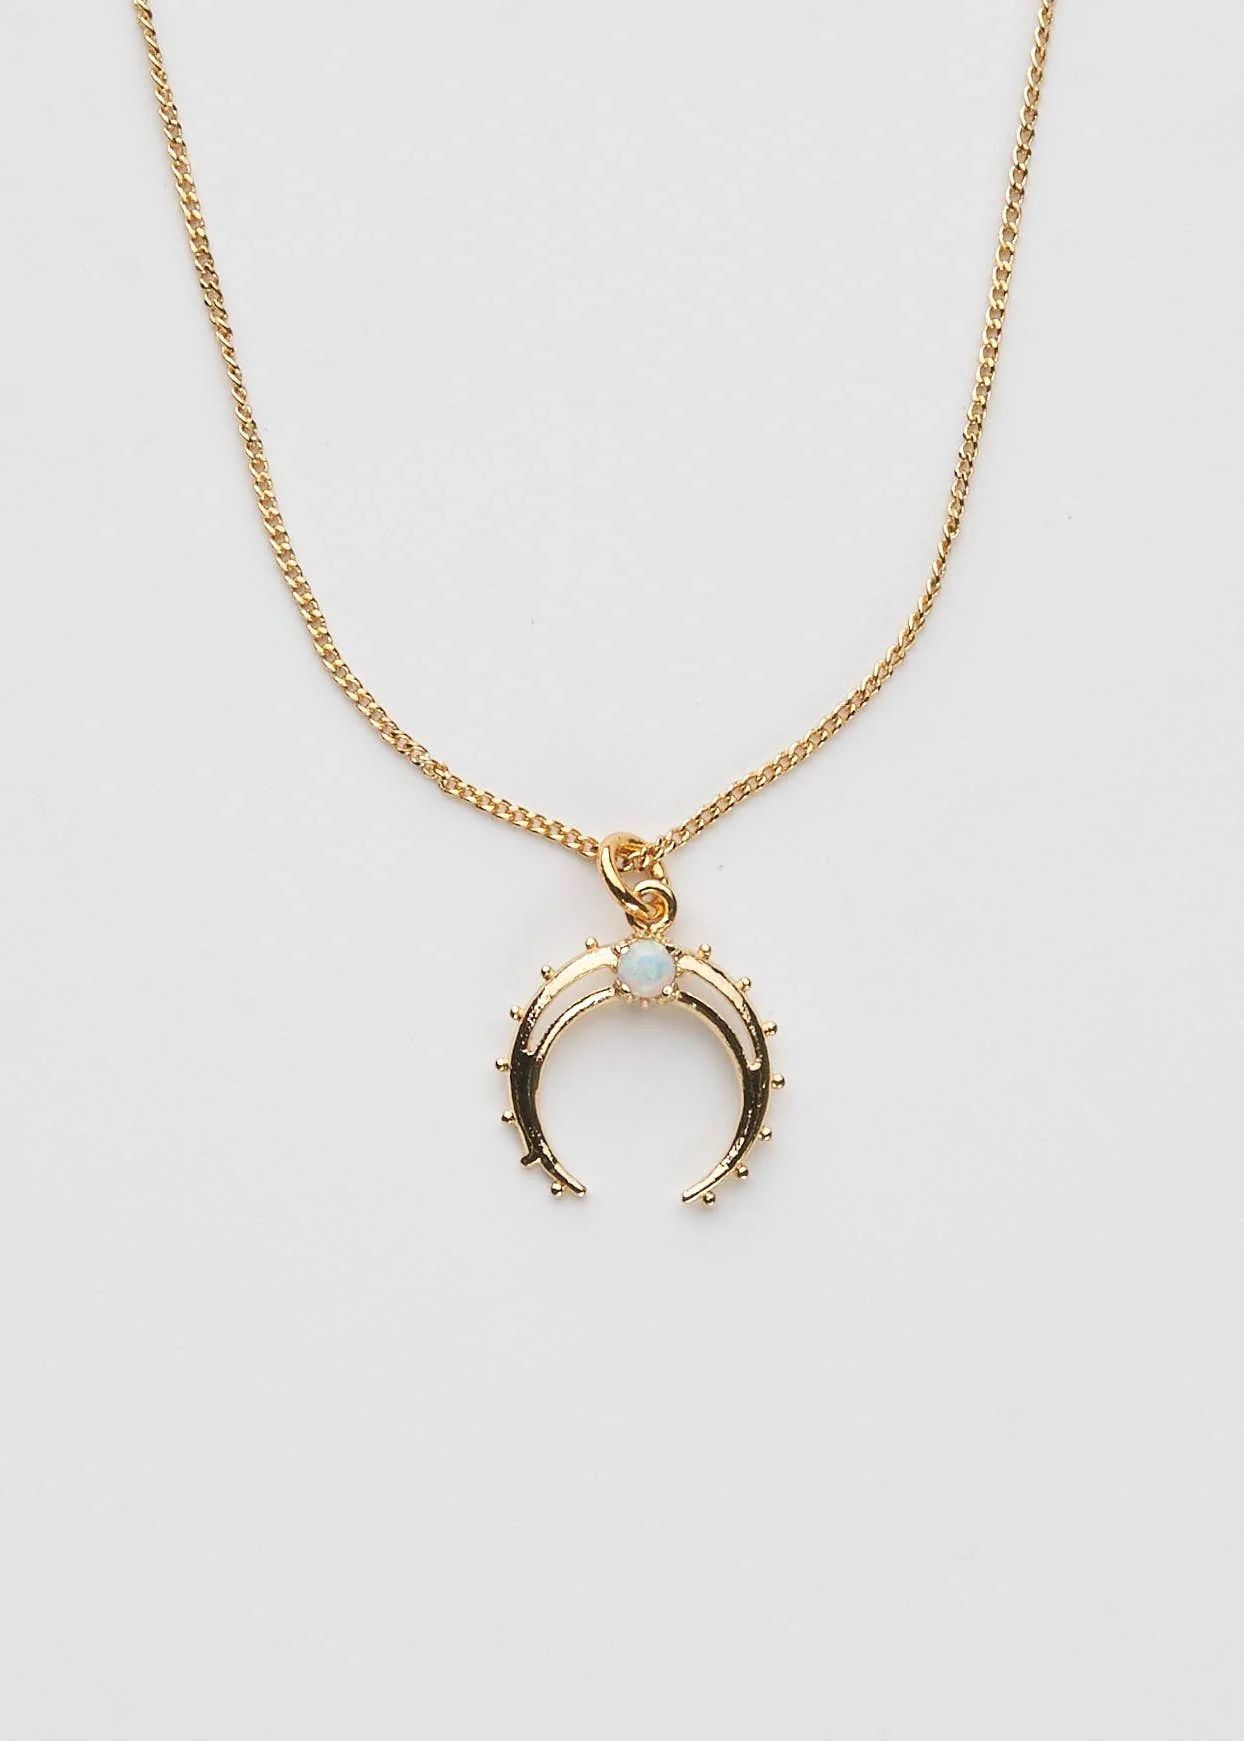 The Opal Moon Necklace | Riah Jane & Co